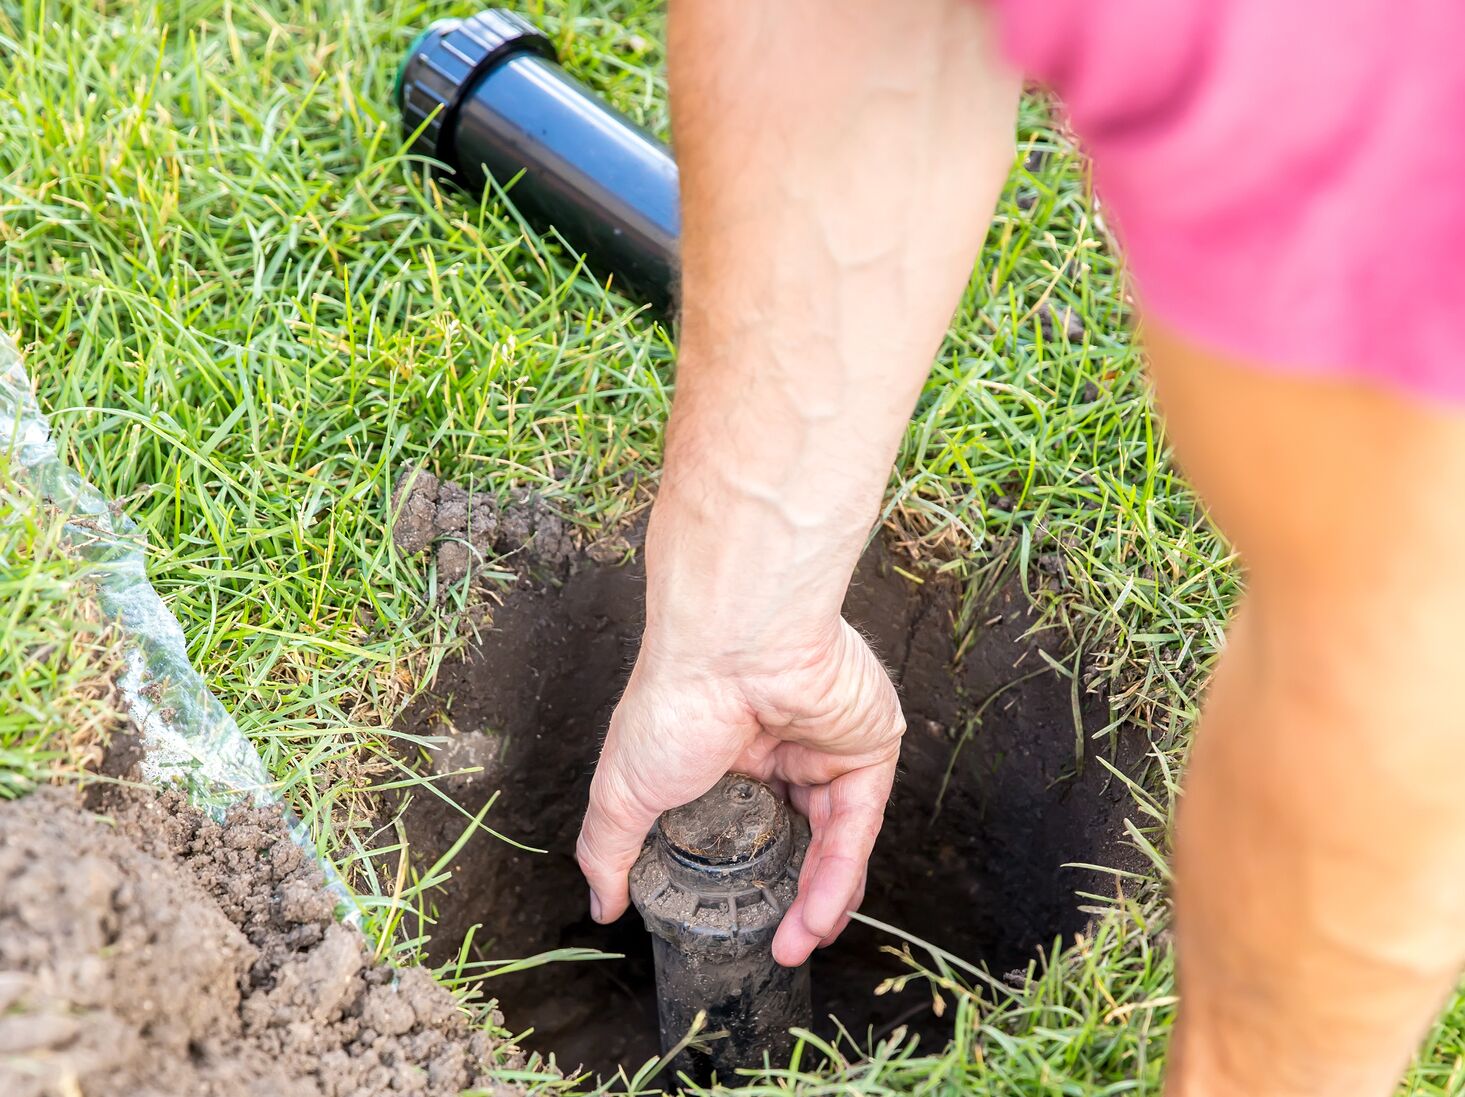 Lawn Sprinkler System Installation: How to Install a Lawn